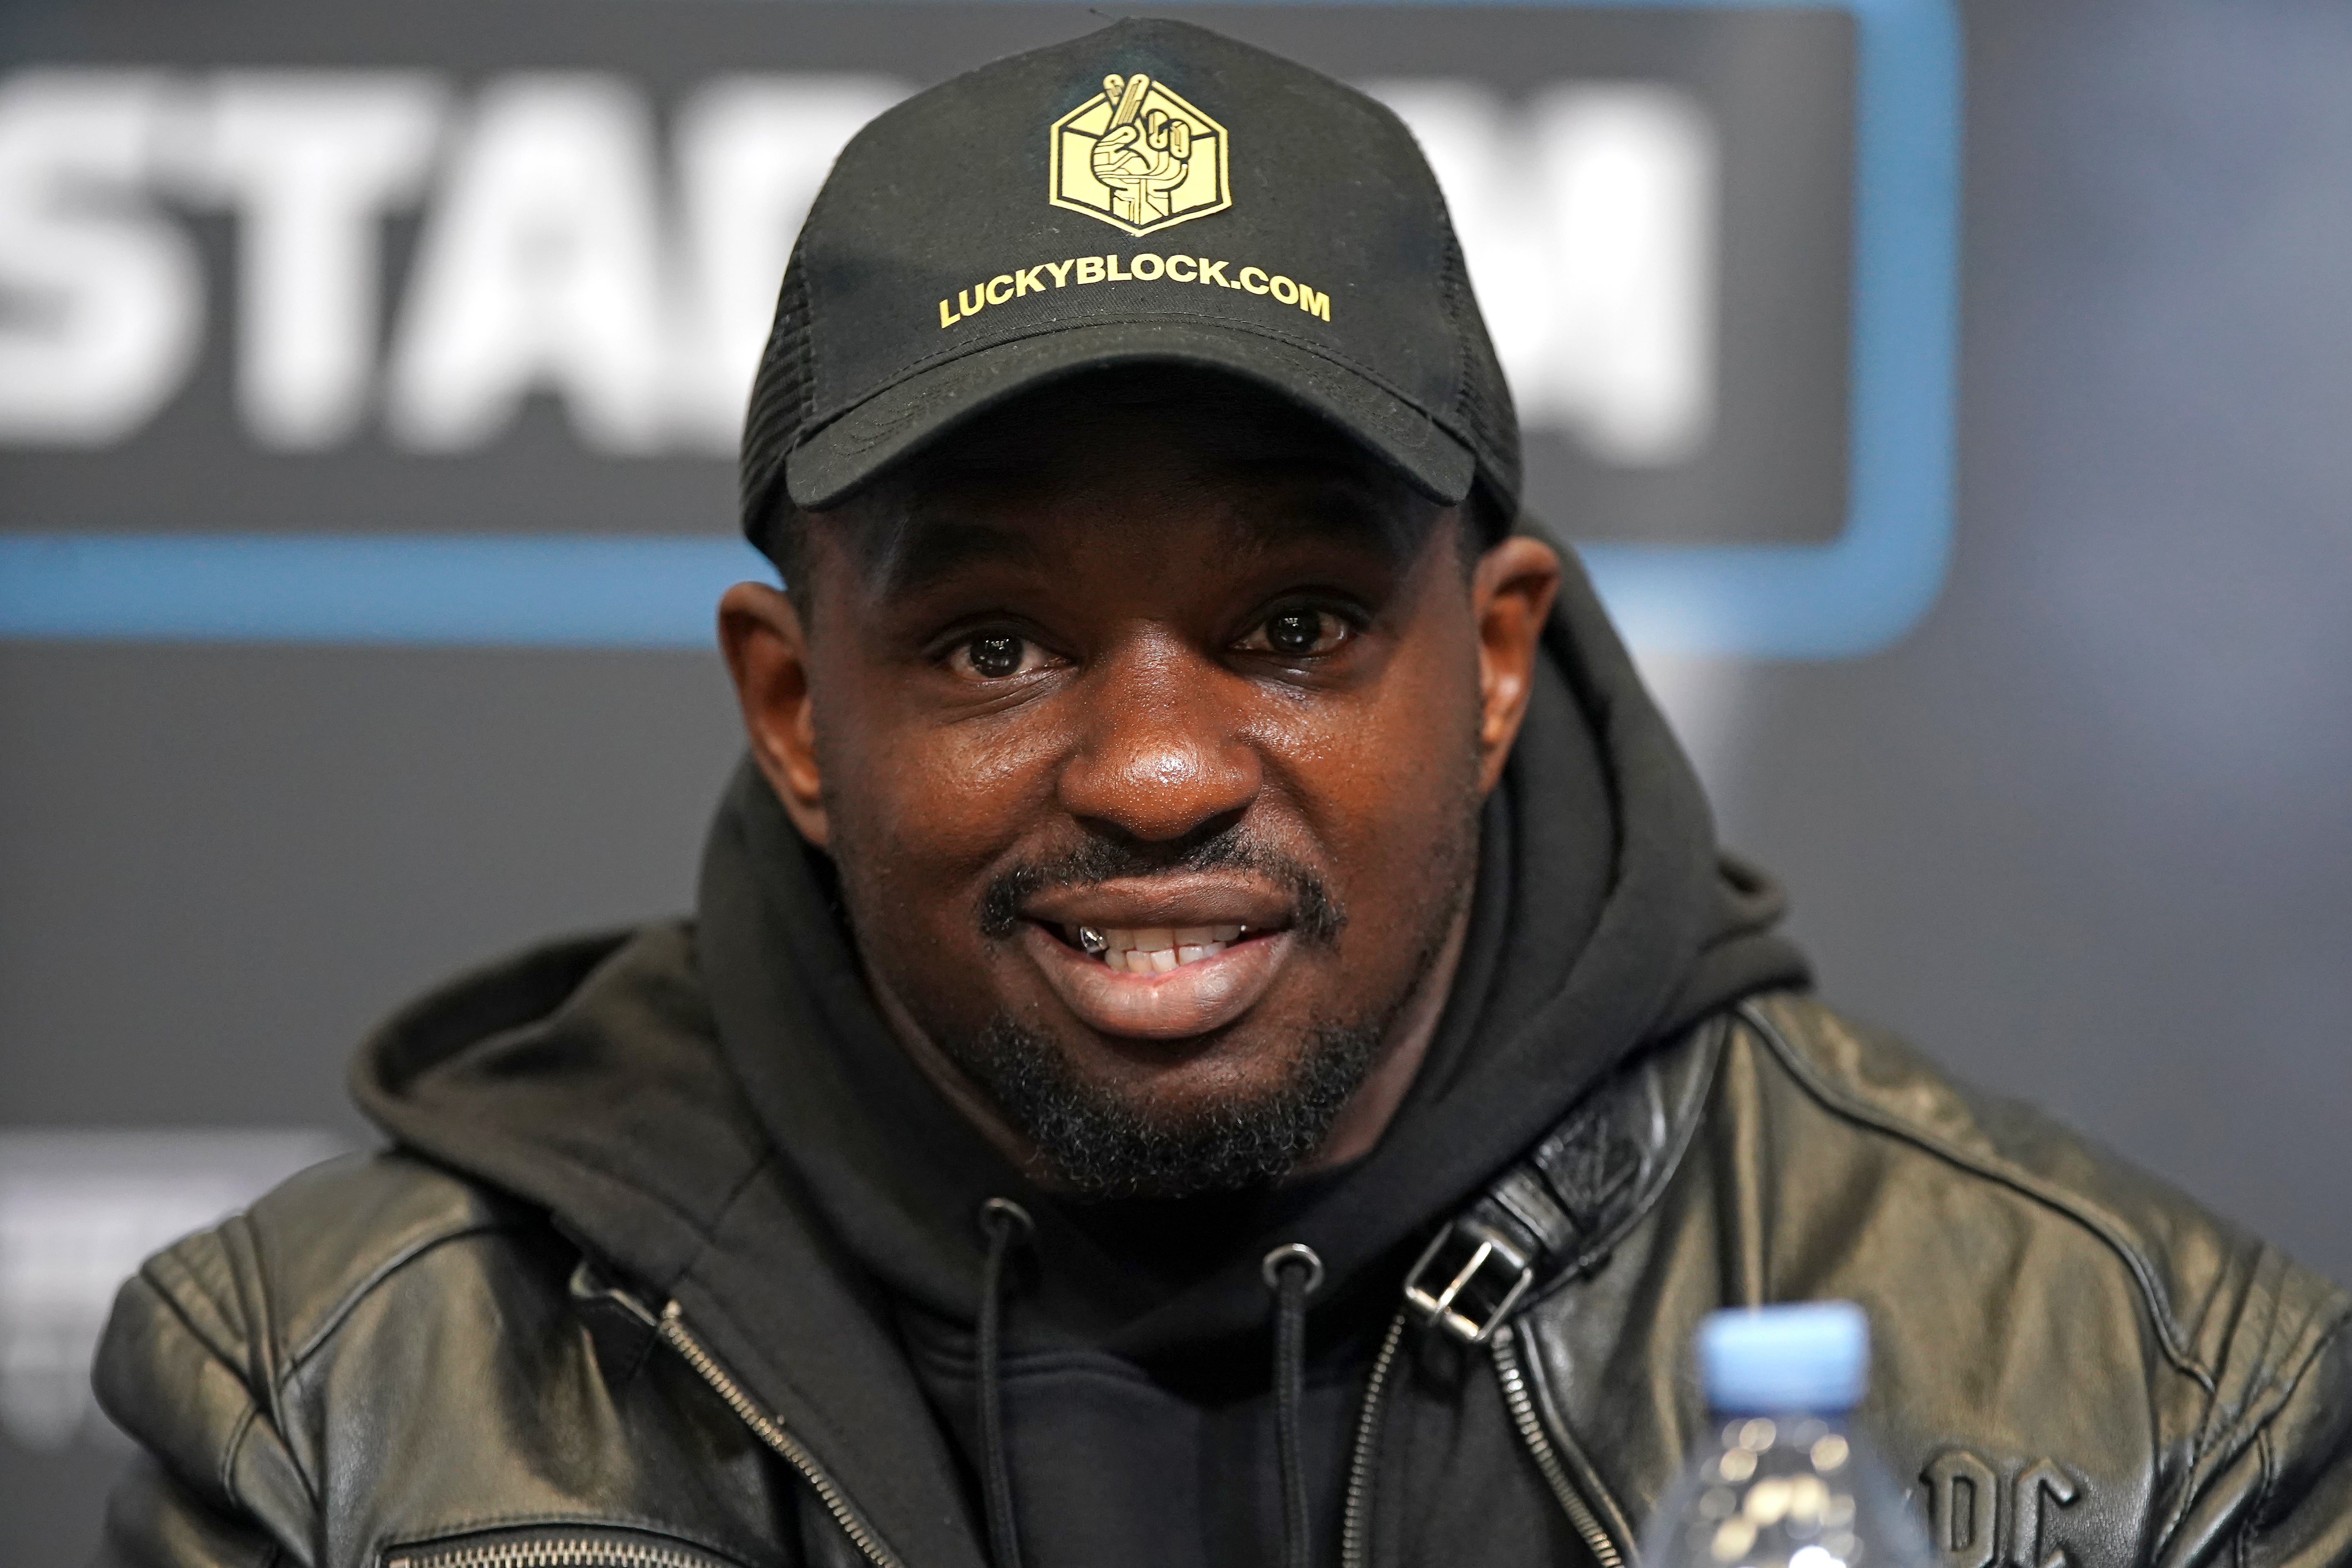 Dillian Whyte shared a tribute to his promoter’s son